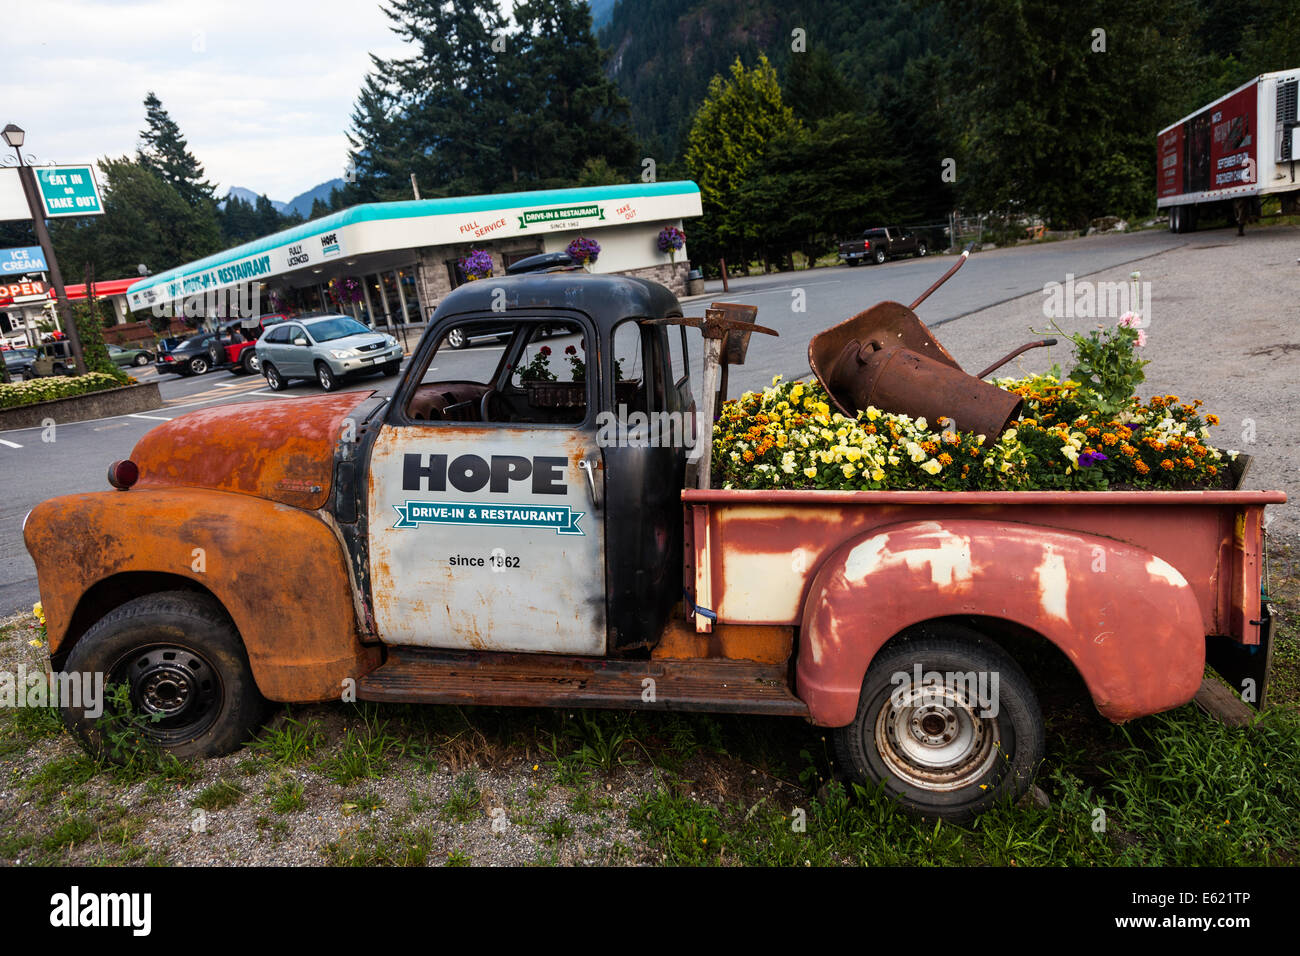 An old pick-up truck used to advertize a drive-in restaurant in Hope, British Columbia, Canada Stock Photo